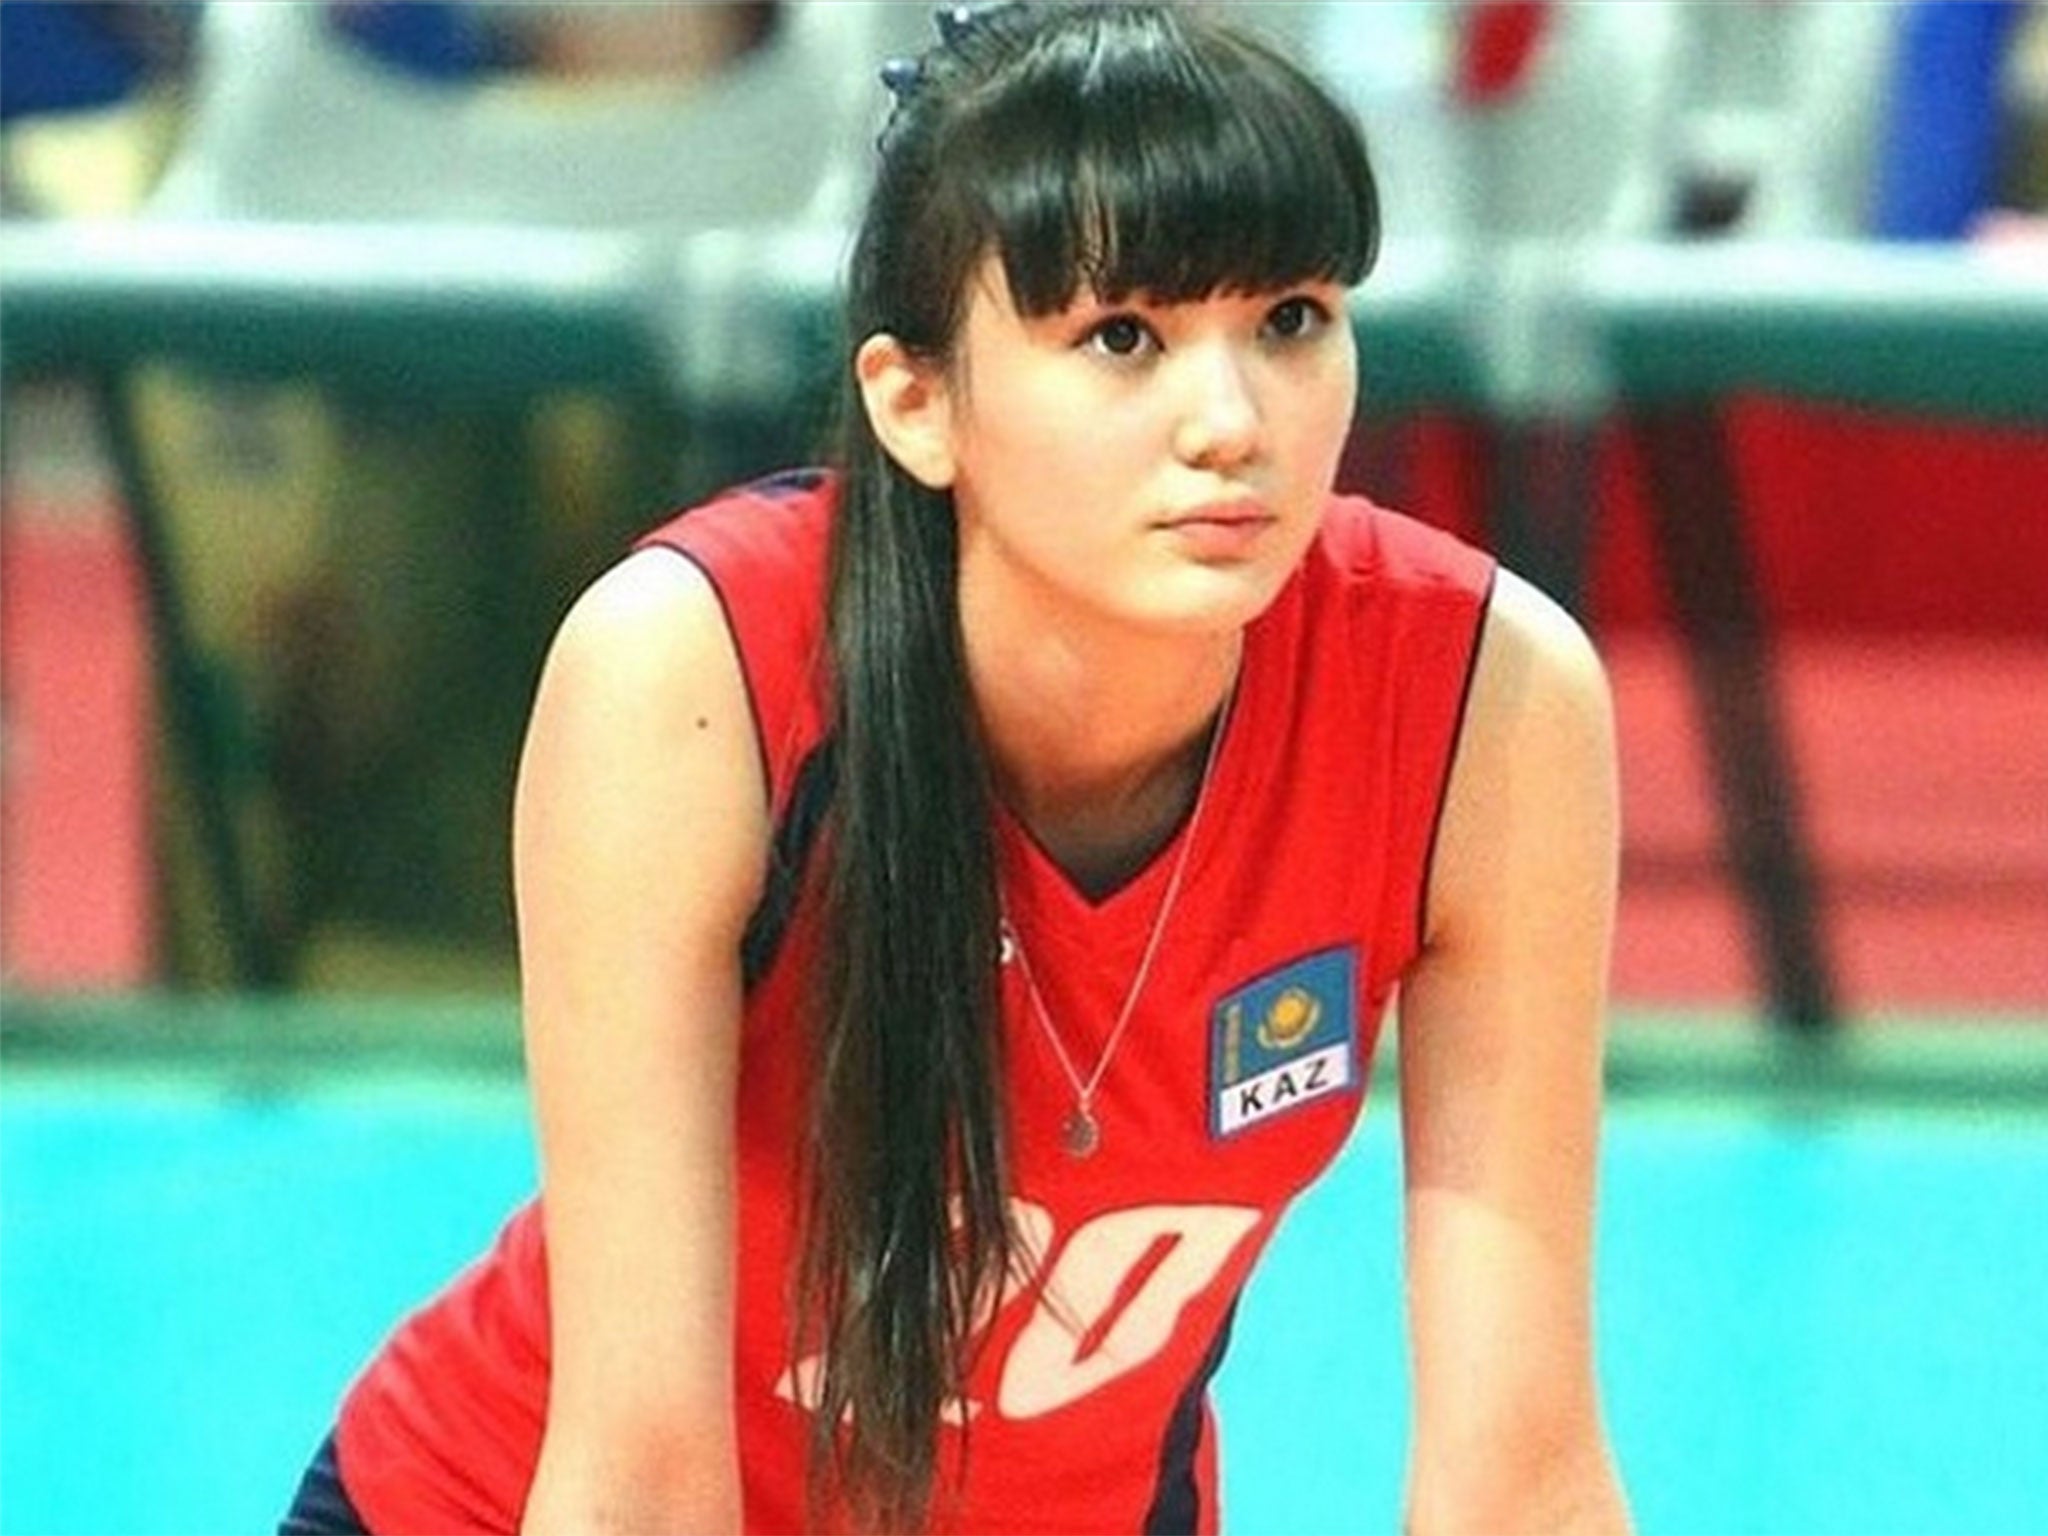 Sabina Altynbekova has said she wants to be famous for playing volleyball, not her looks